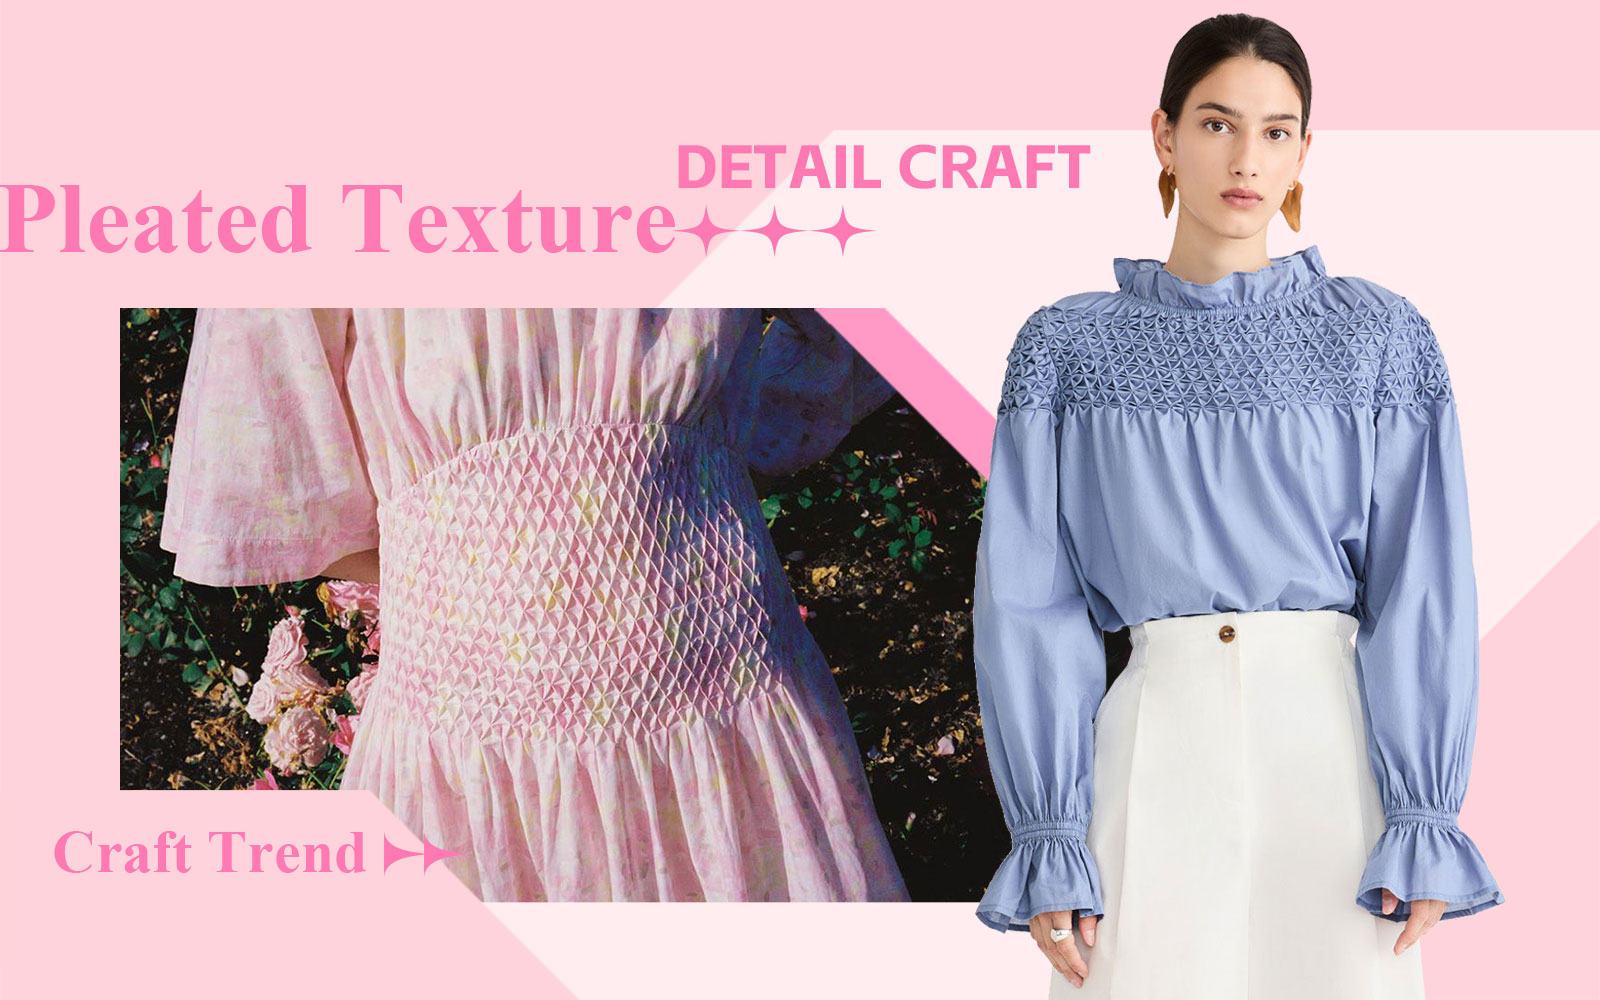 Pleated Texture -- The Detail & Craft Trend for Womenswear